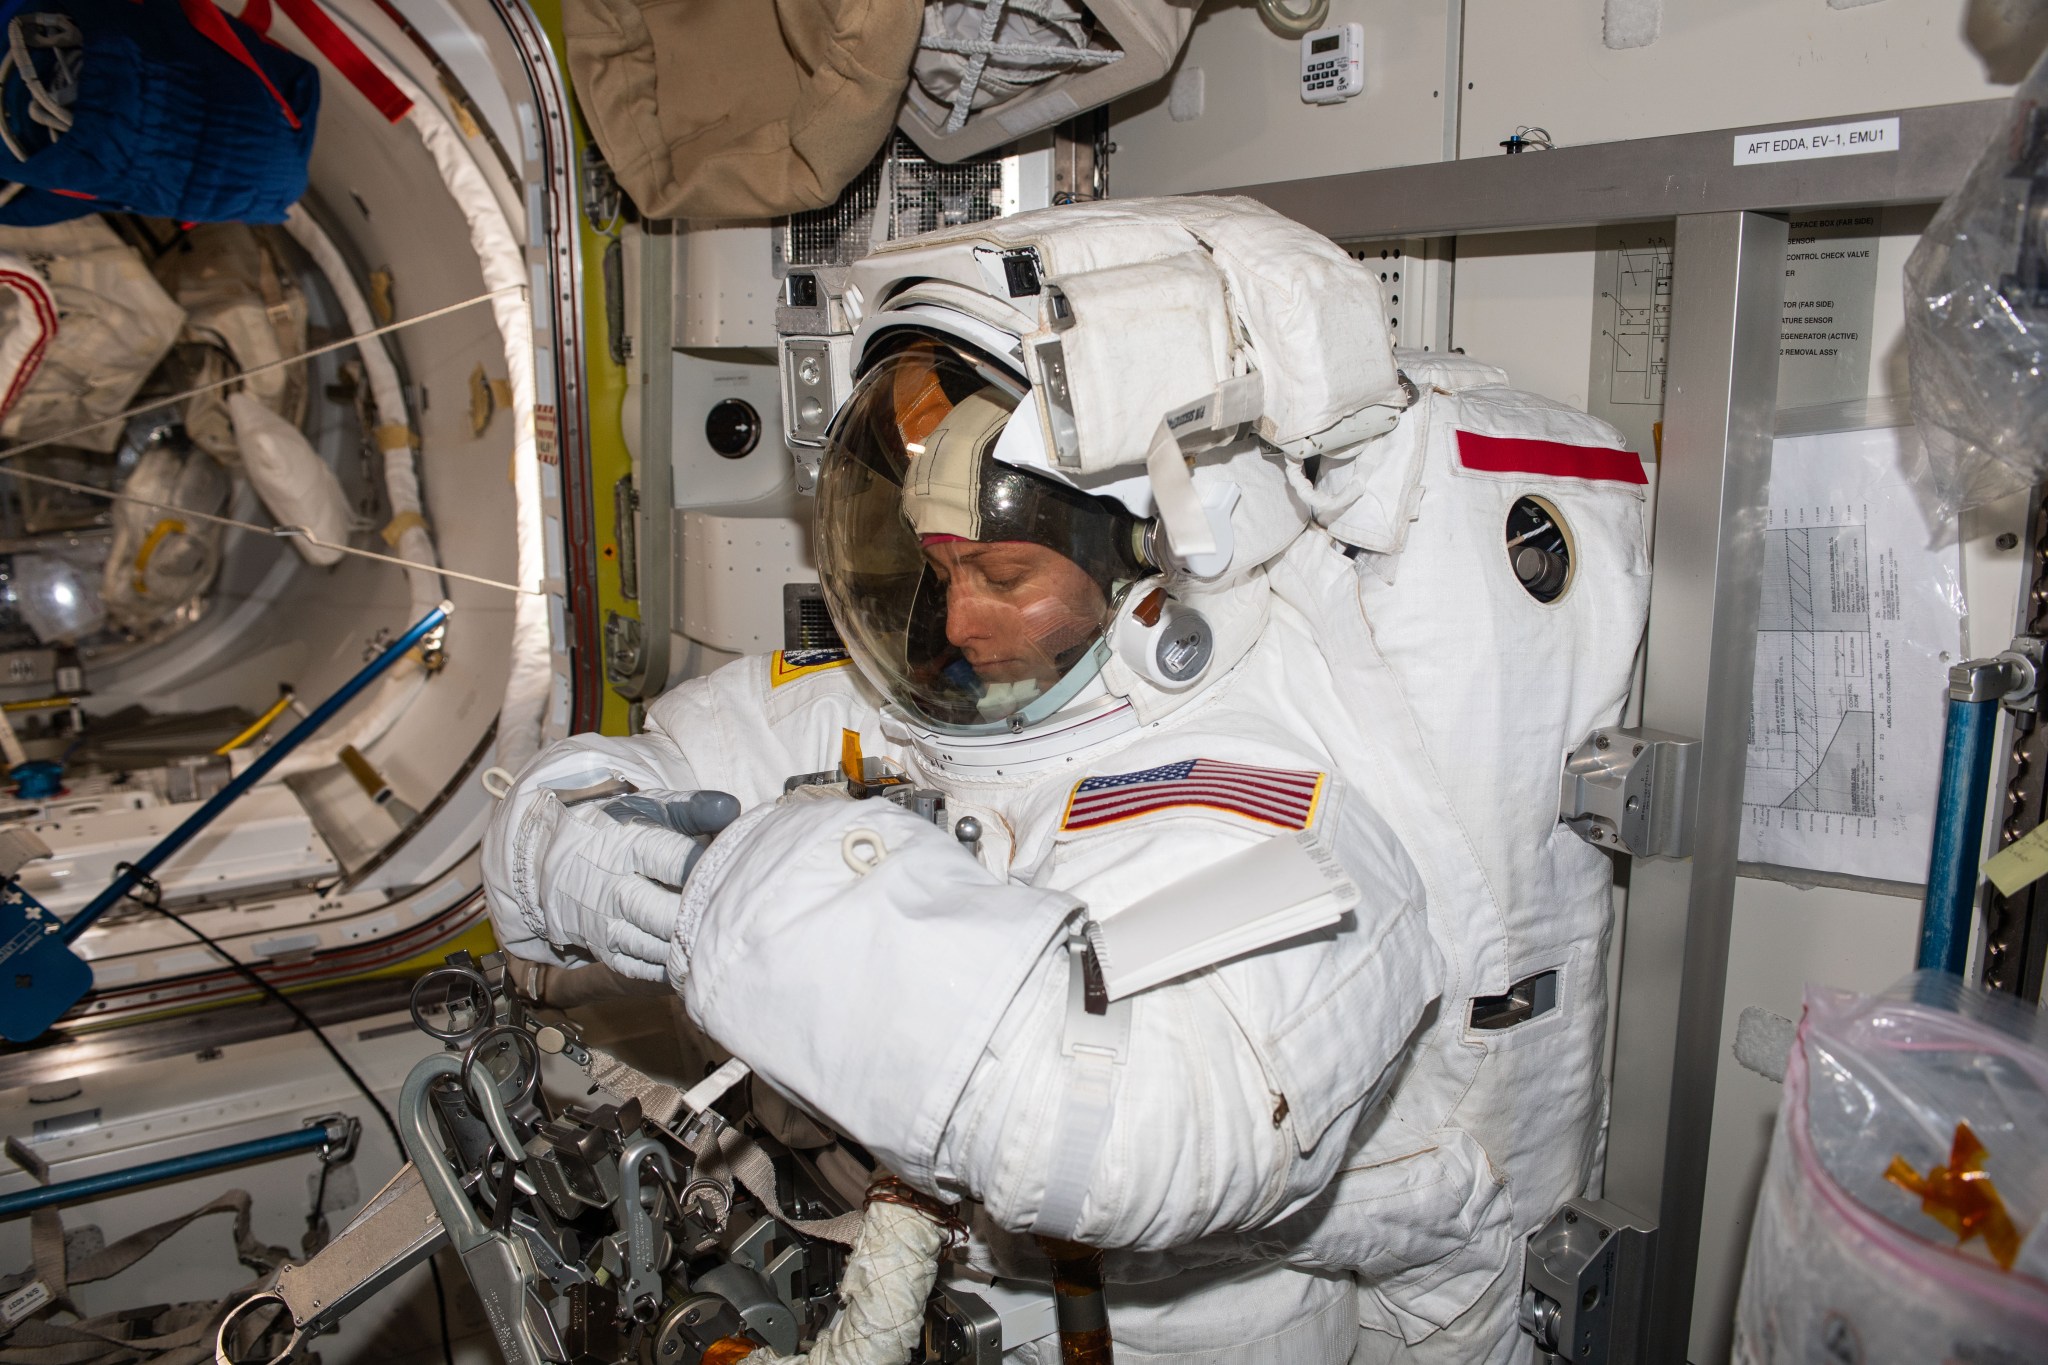 O’Hara is inside a white spacesuit with an American flag on the shoulder. Her face is visible through the clear front of the helmet, and she is using her gloved right hand to tuck the suit into the glove of her left hand. The suit is attached to a metal frame on the wall.